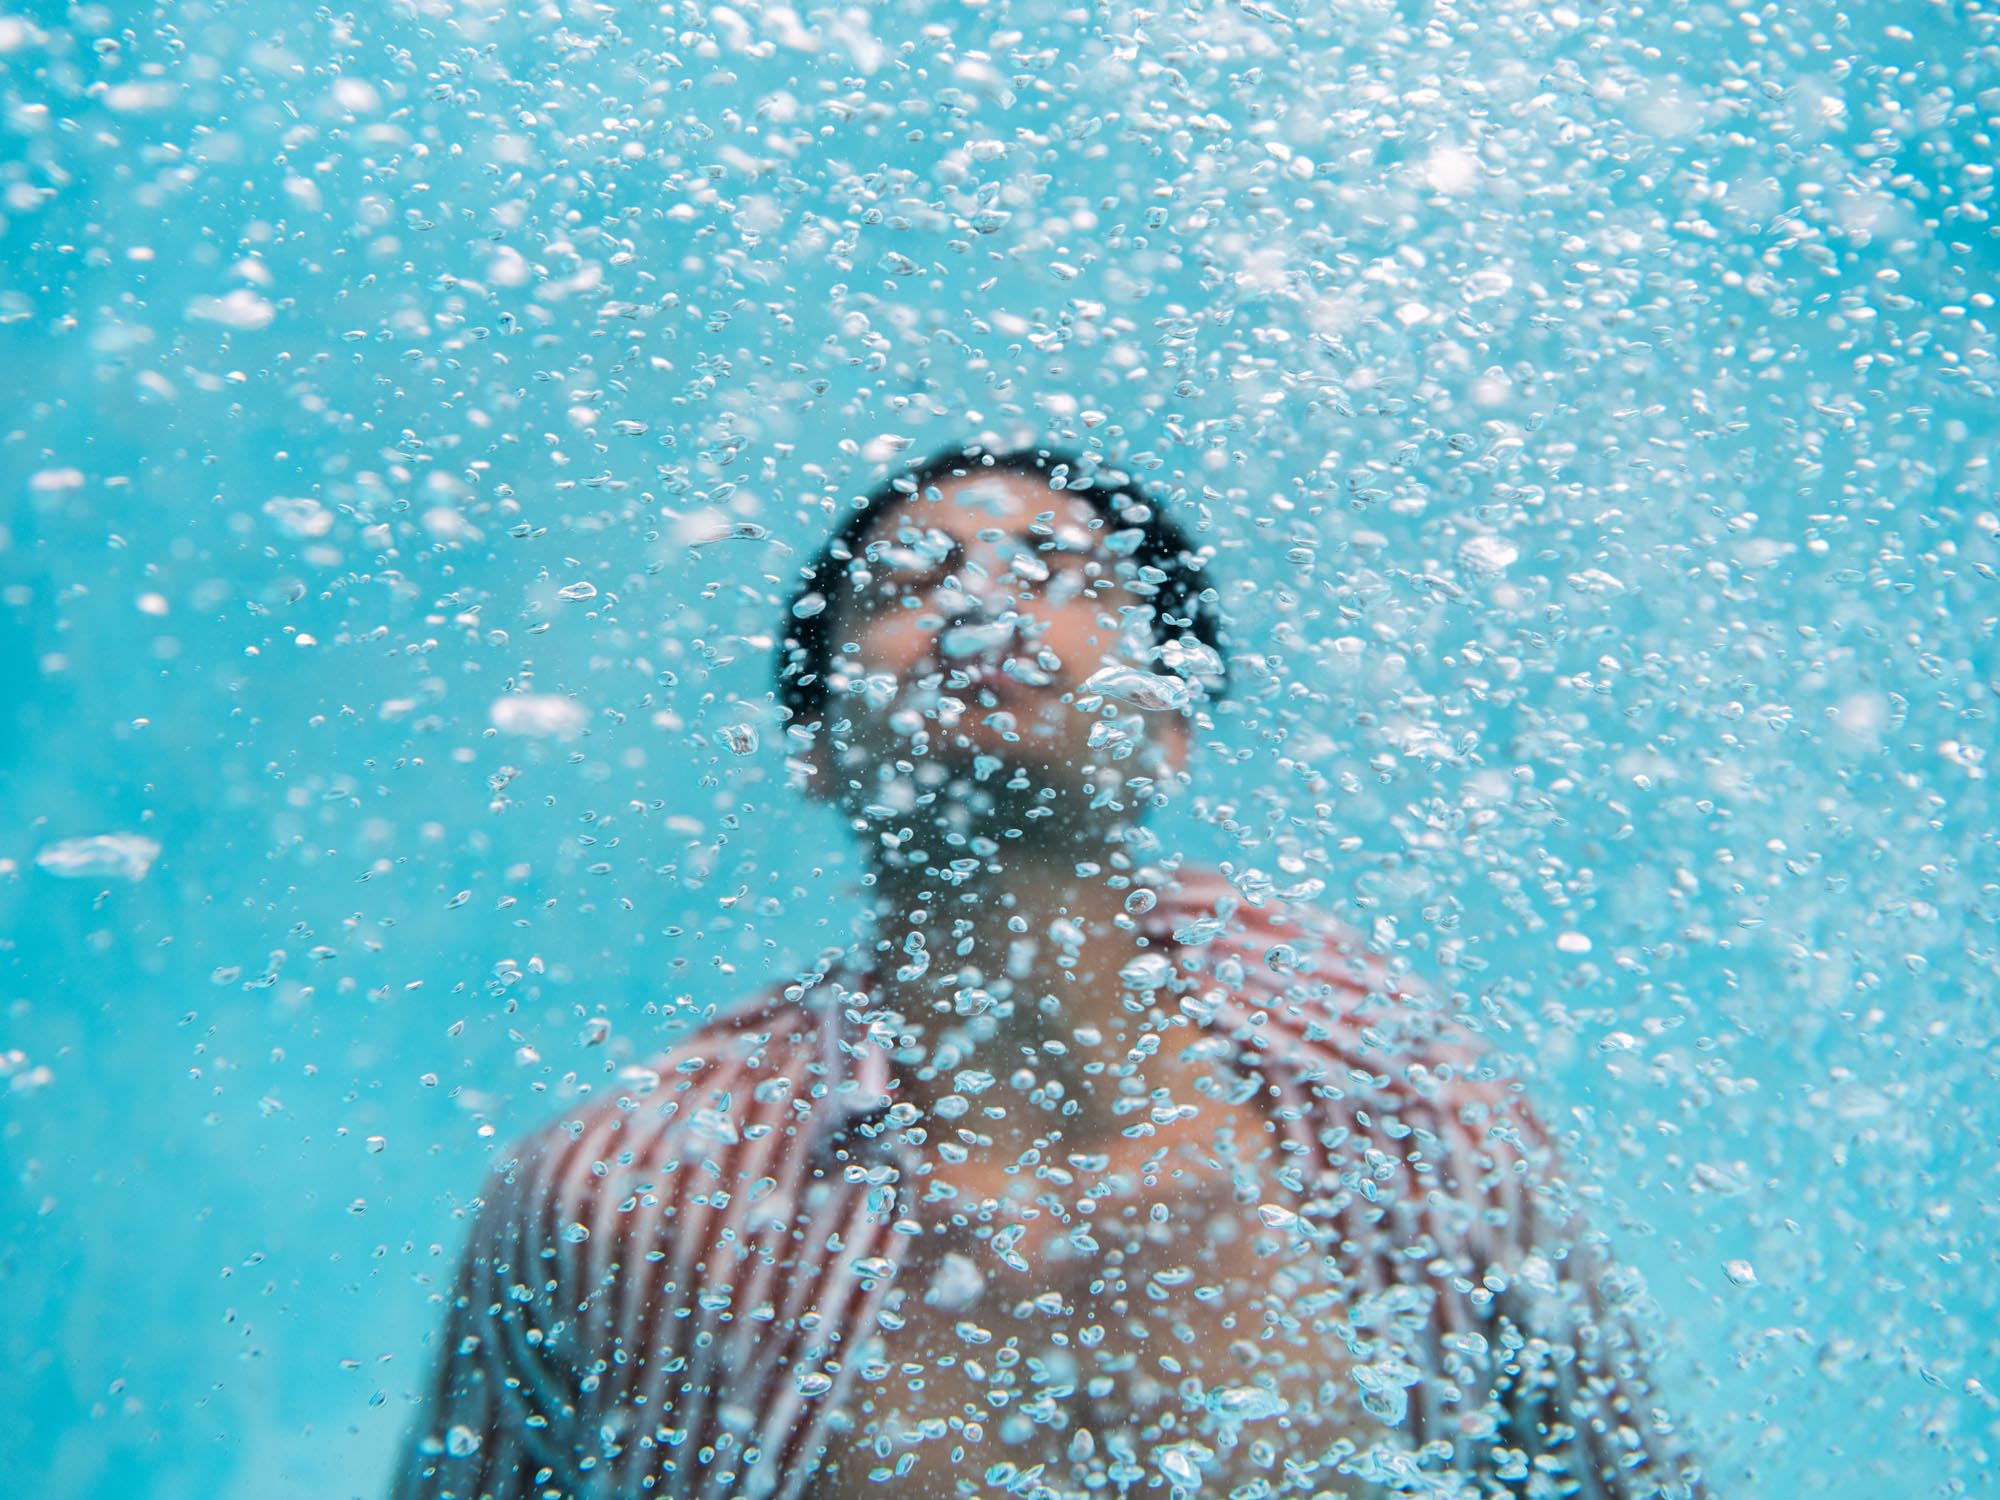 Submerged underwater, a man is surrounded by a peppering of bubbles